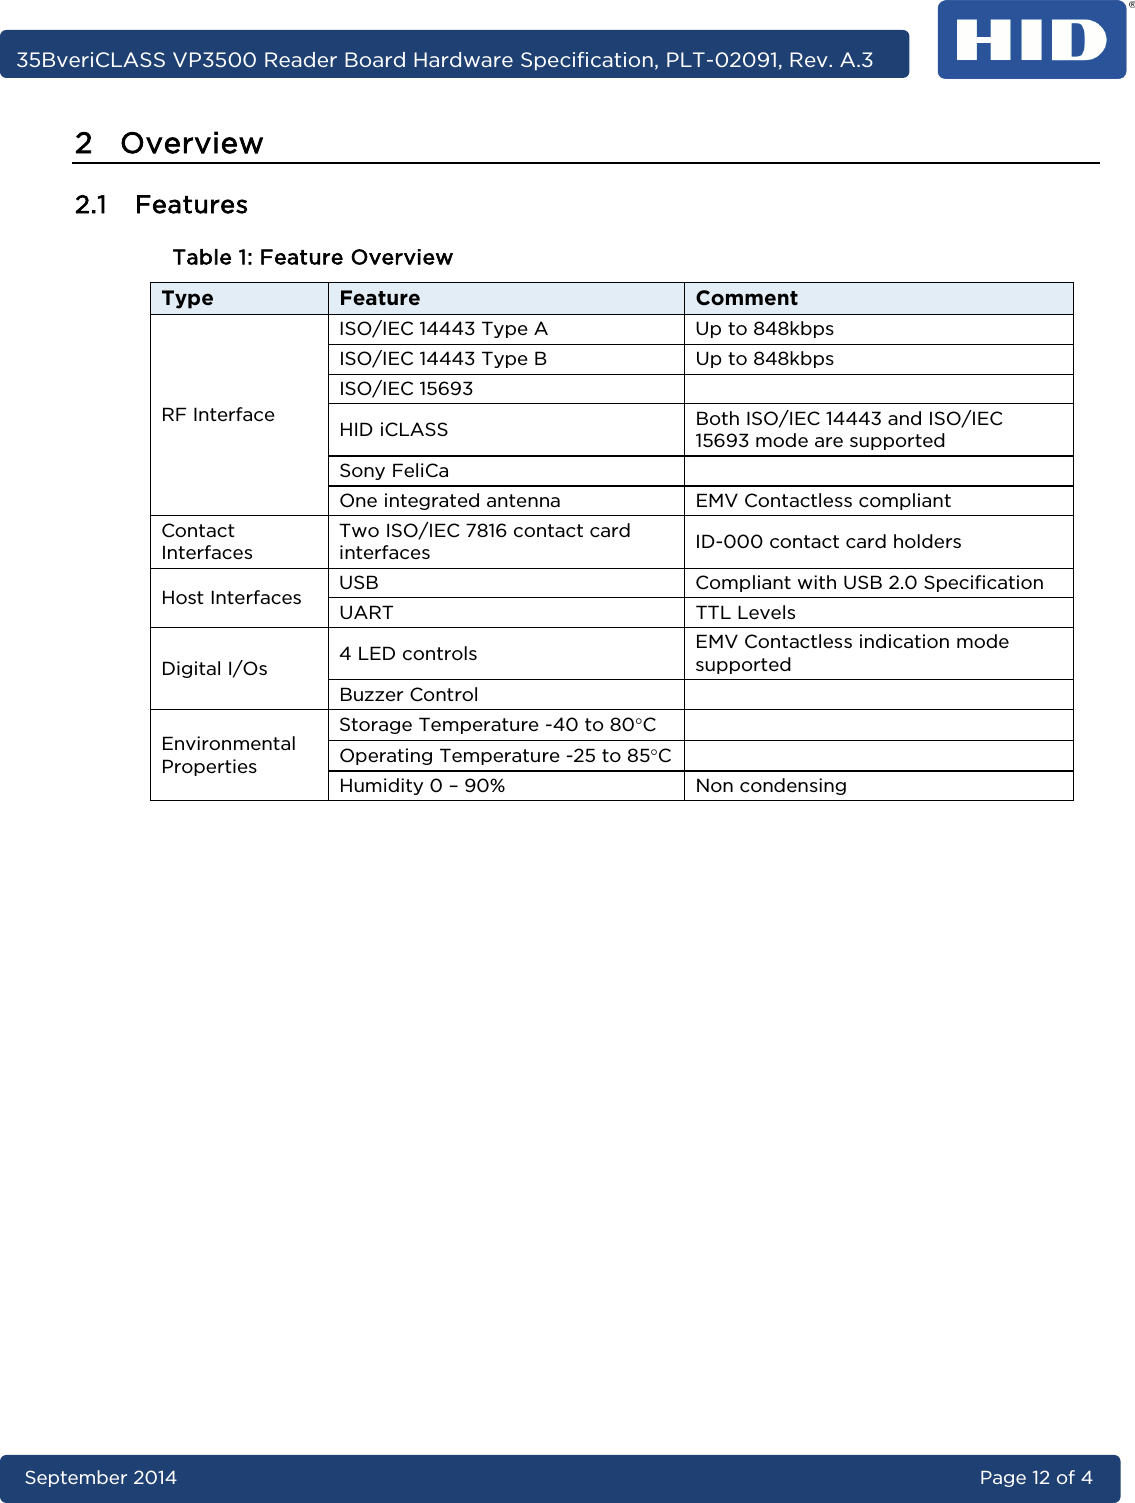     35BveriCLASS VP3500 Reader Board Hardware Specification, PLT-02091, Rev. A.3 September 2014 Page 12 of 4  2 Overview 2.1 Features Table 1: Feature Overview Type  Feature Comment RF Interface ISO/IEC 14443 Type A Up to 848kbps ISO/IEC 14443 Type B Up to 848kbps ISO/IEC 15693   HID iCLASS Both ISO/IEC 14443 and ISO/IEC 15693 mode are supported Sony FeliCa   One integrated antenna EMV Contactless compliant Contact Interfaces Two ISO/IEC 7816 contact card interfaces ID-000 contact card holders Host Interfaces USB  Compliant with USB 2.0 Specification UART TTL Levels Digital I/Os  4 LED controls EMV Contactless indication mode supported Buzzer Control   Environmental Properties Storage Temperature -40 to 80°C   Operating Temperature -25 to 85°C   Humidity 0 – 90%  Non condensing     